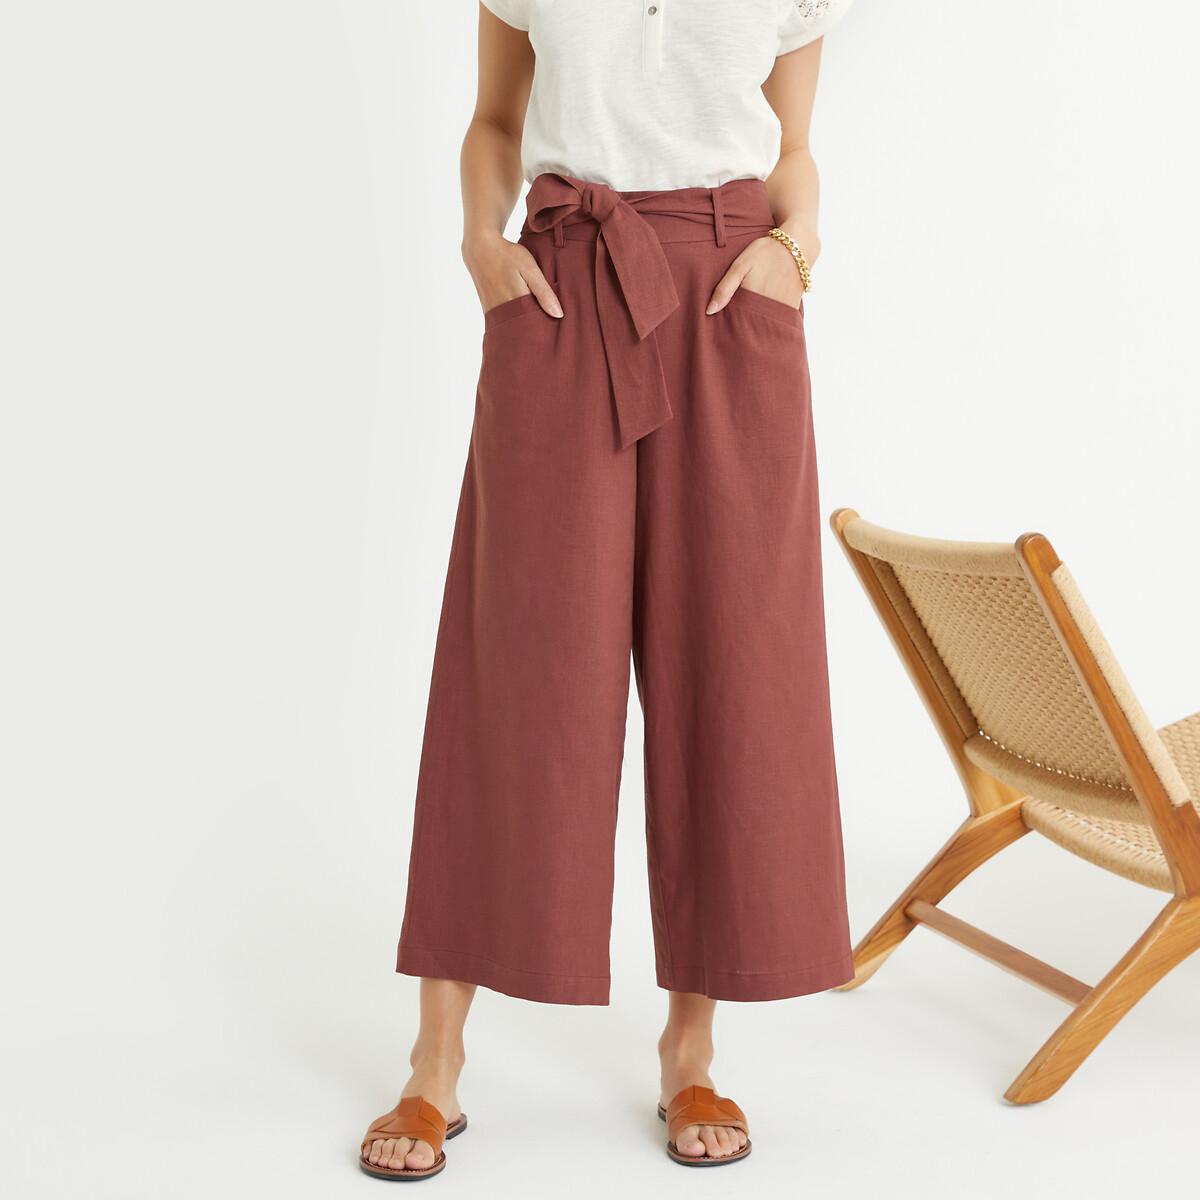 Cropped Wide Leg Trousers in Cotton/Linen, Length 24.5"